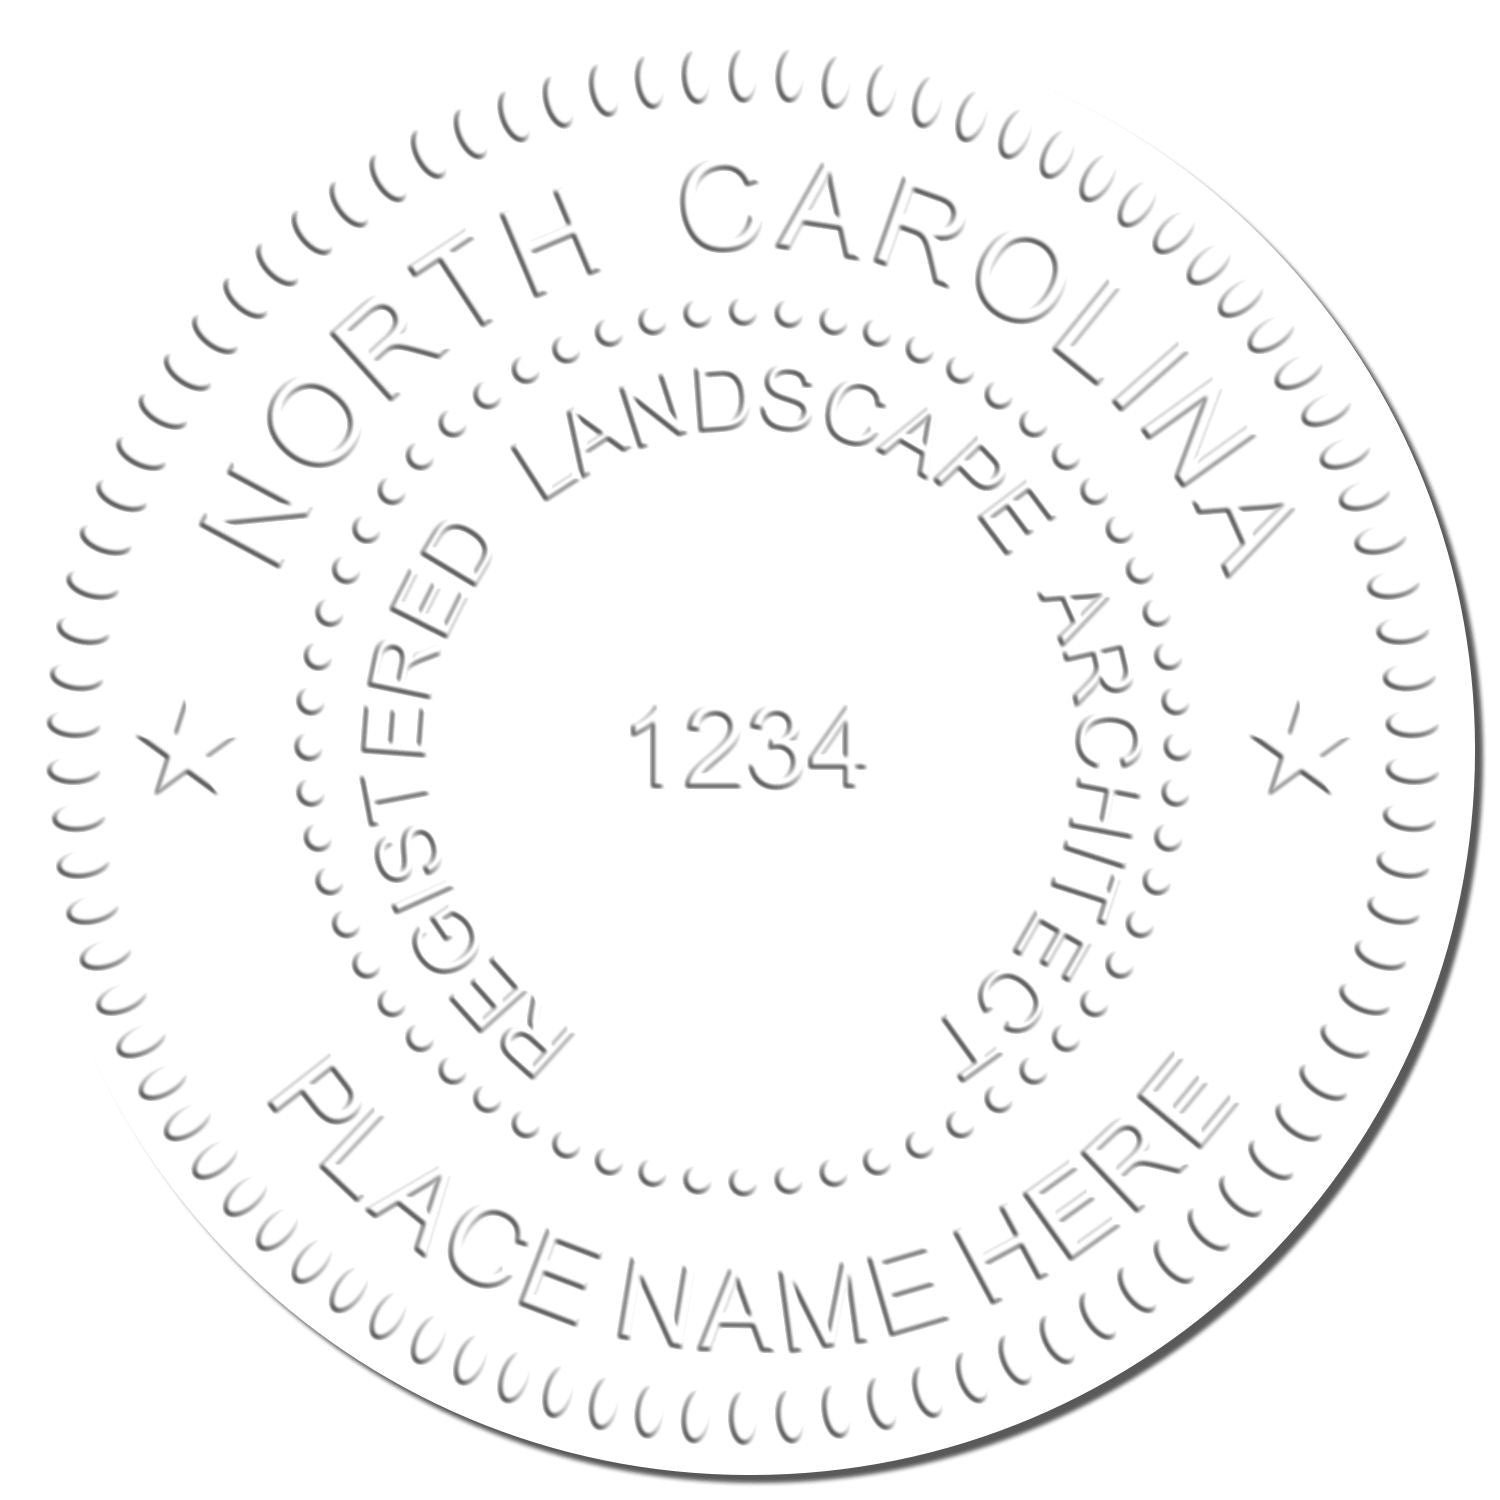 This paper is stamped with a sample imprint of the North Carolina Long Reach Landscape Architect Embossing Stamp, signifying its quality and reliability.